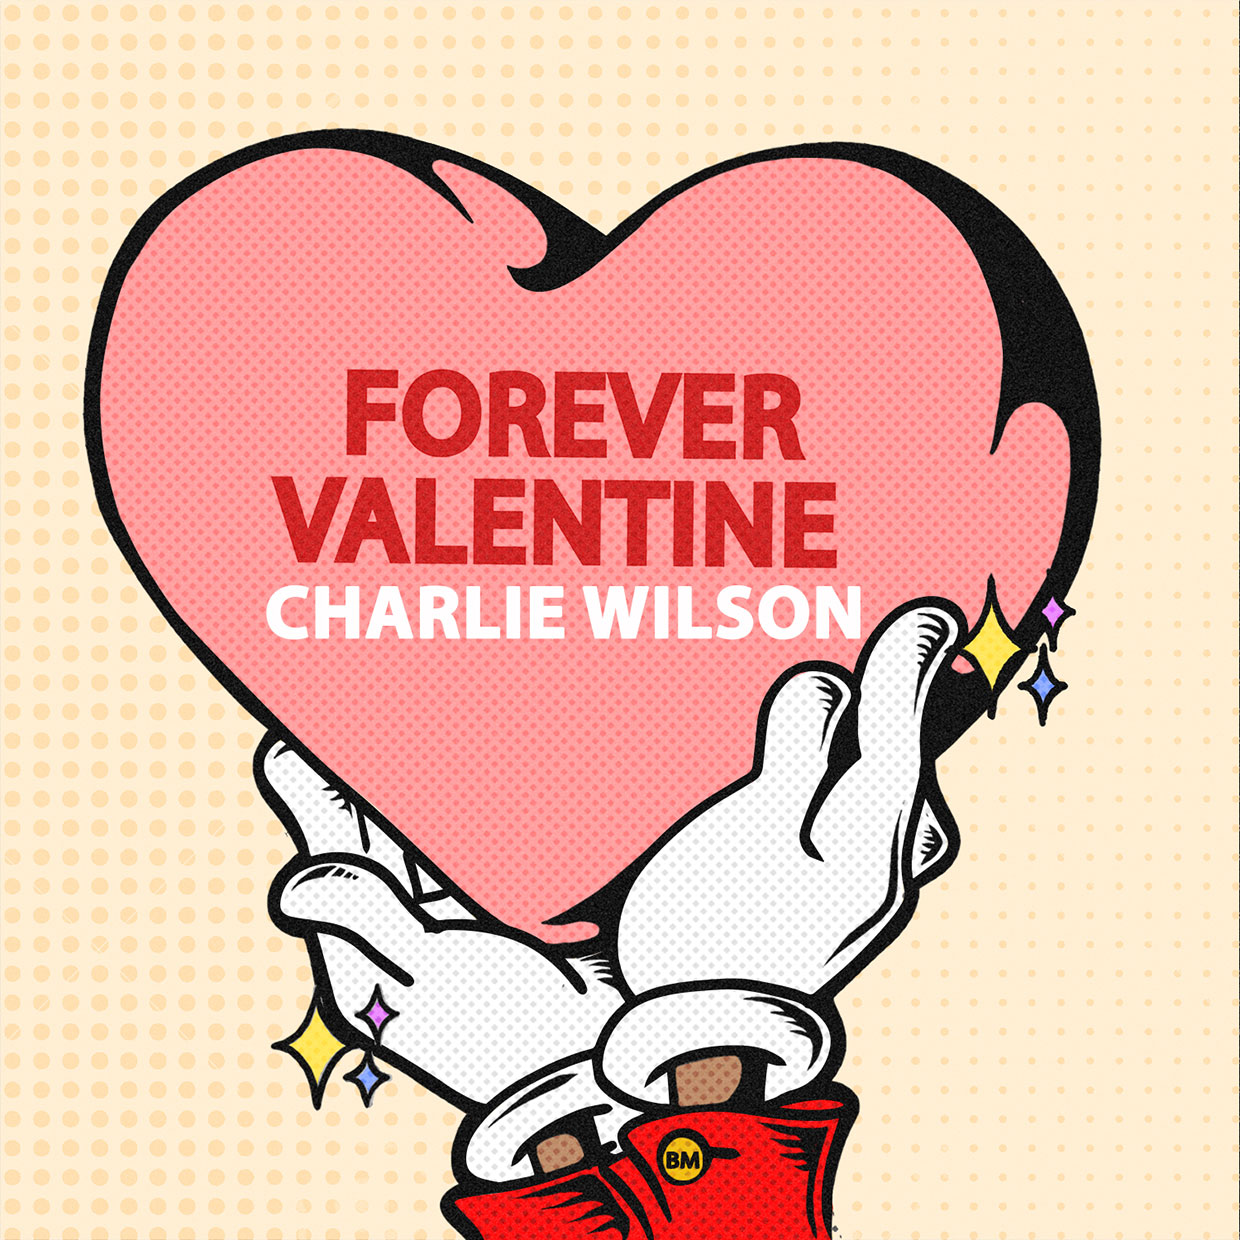 Charlie Wilson Set to Release New Single “Forever Valentine” Co-Written by Bruno Mars